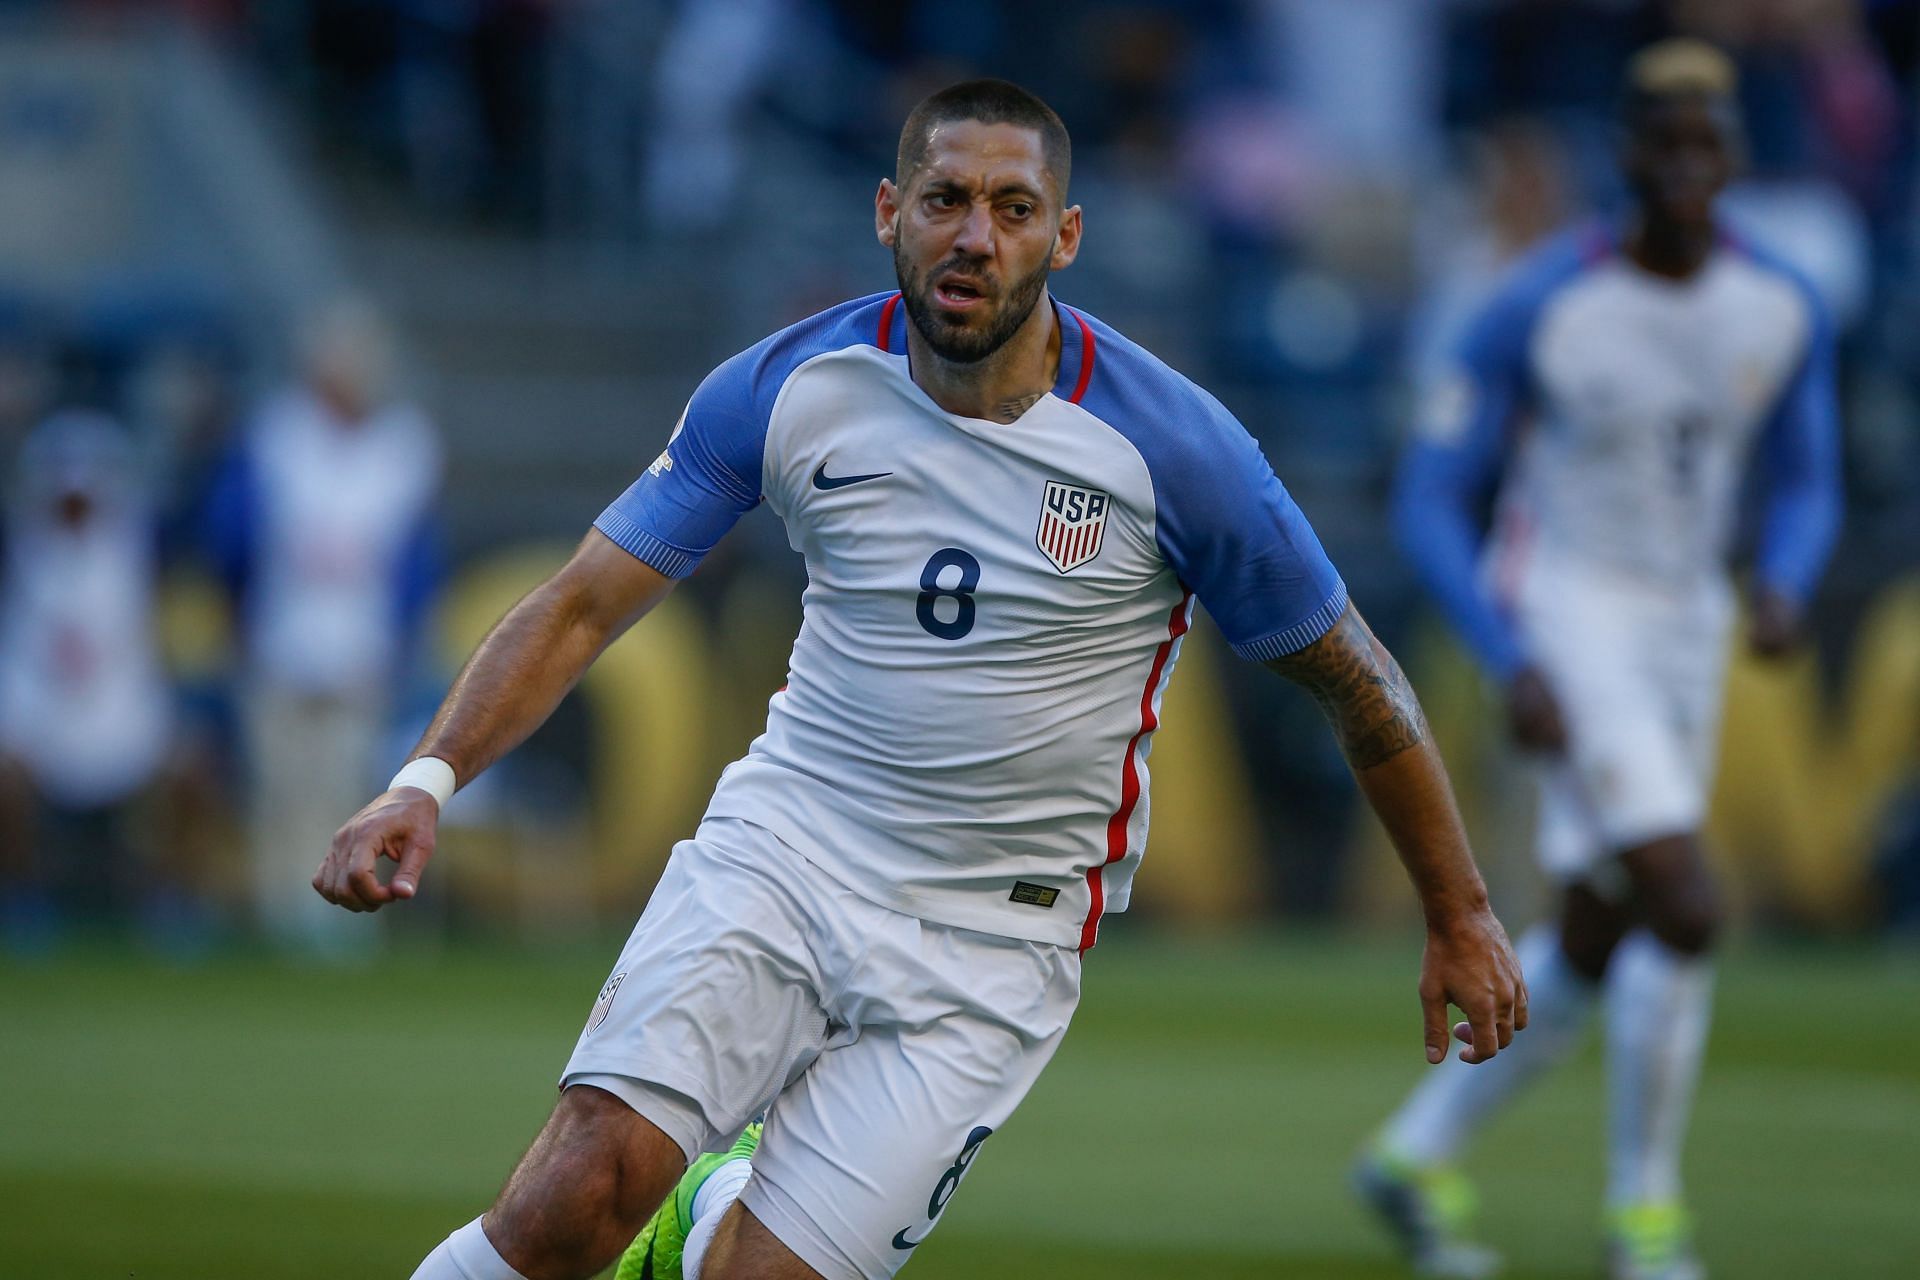 Former football player, Clint Dempsey of the United States reacts after scoring a goal against Ecuador during the 2016 Quarterfinal - Copa America Centenario match at CenturyLink Field on June 16, 2016 in Seattle, Washington.